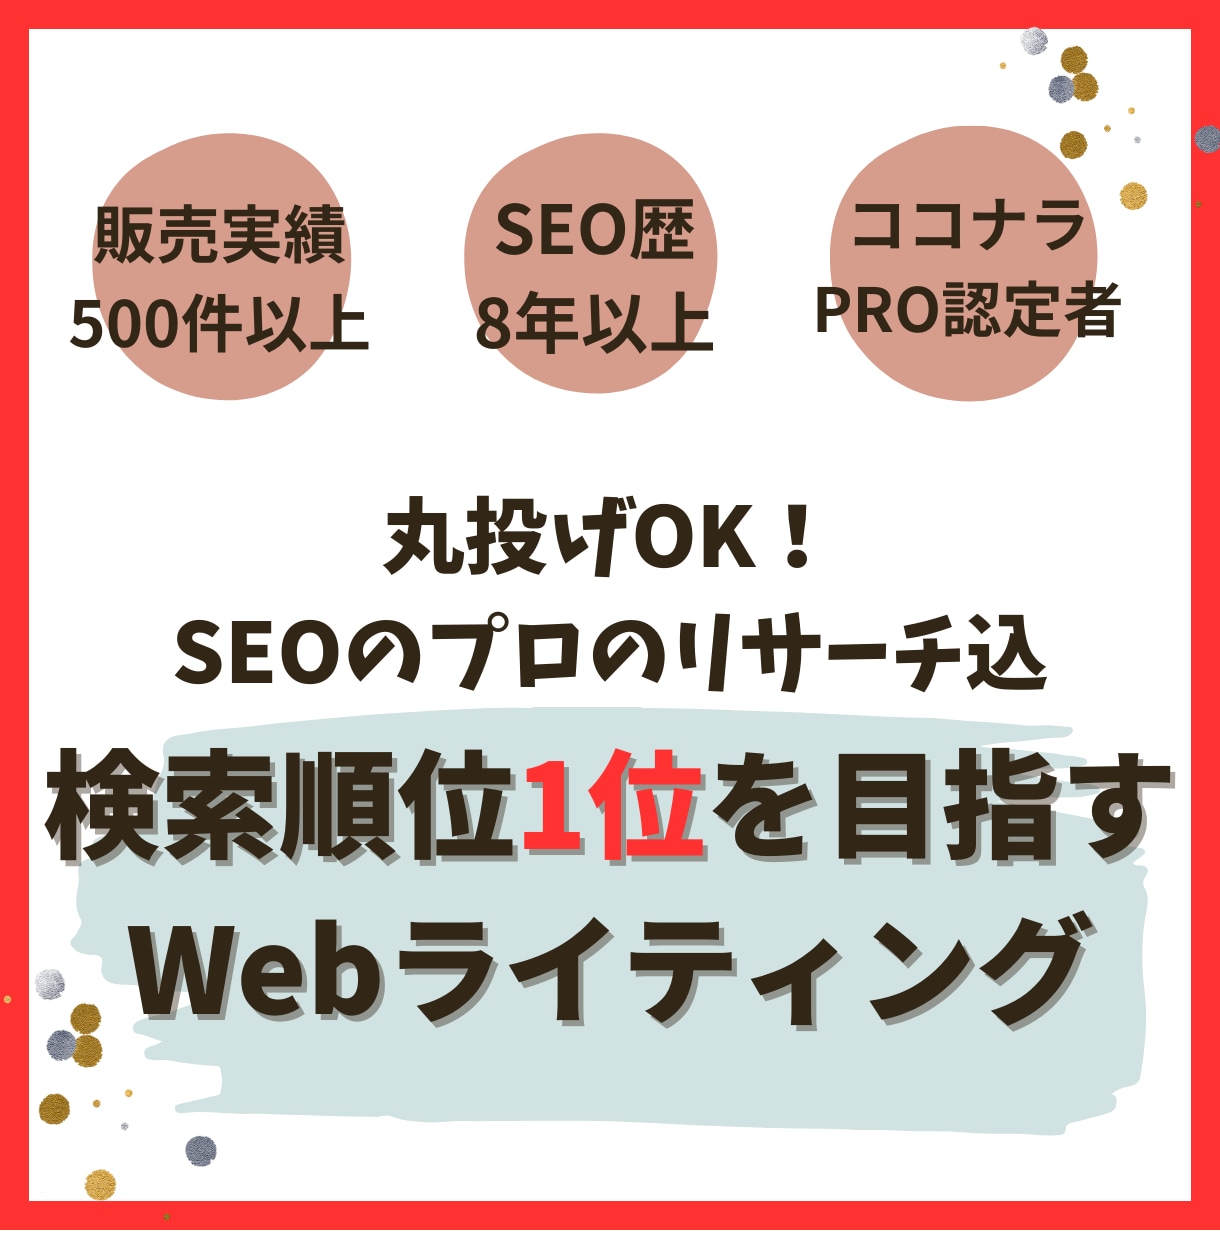 💬Coconara｜SEO writing aiming for first place in search rankings blurry1 77…